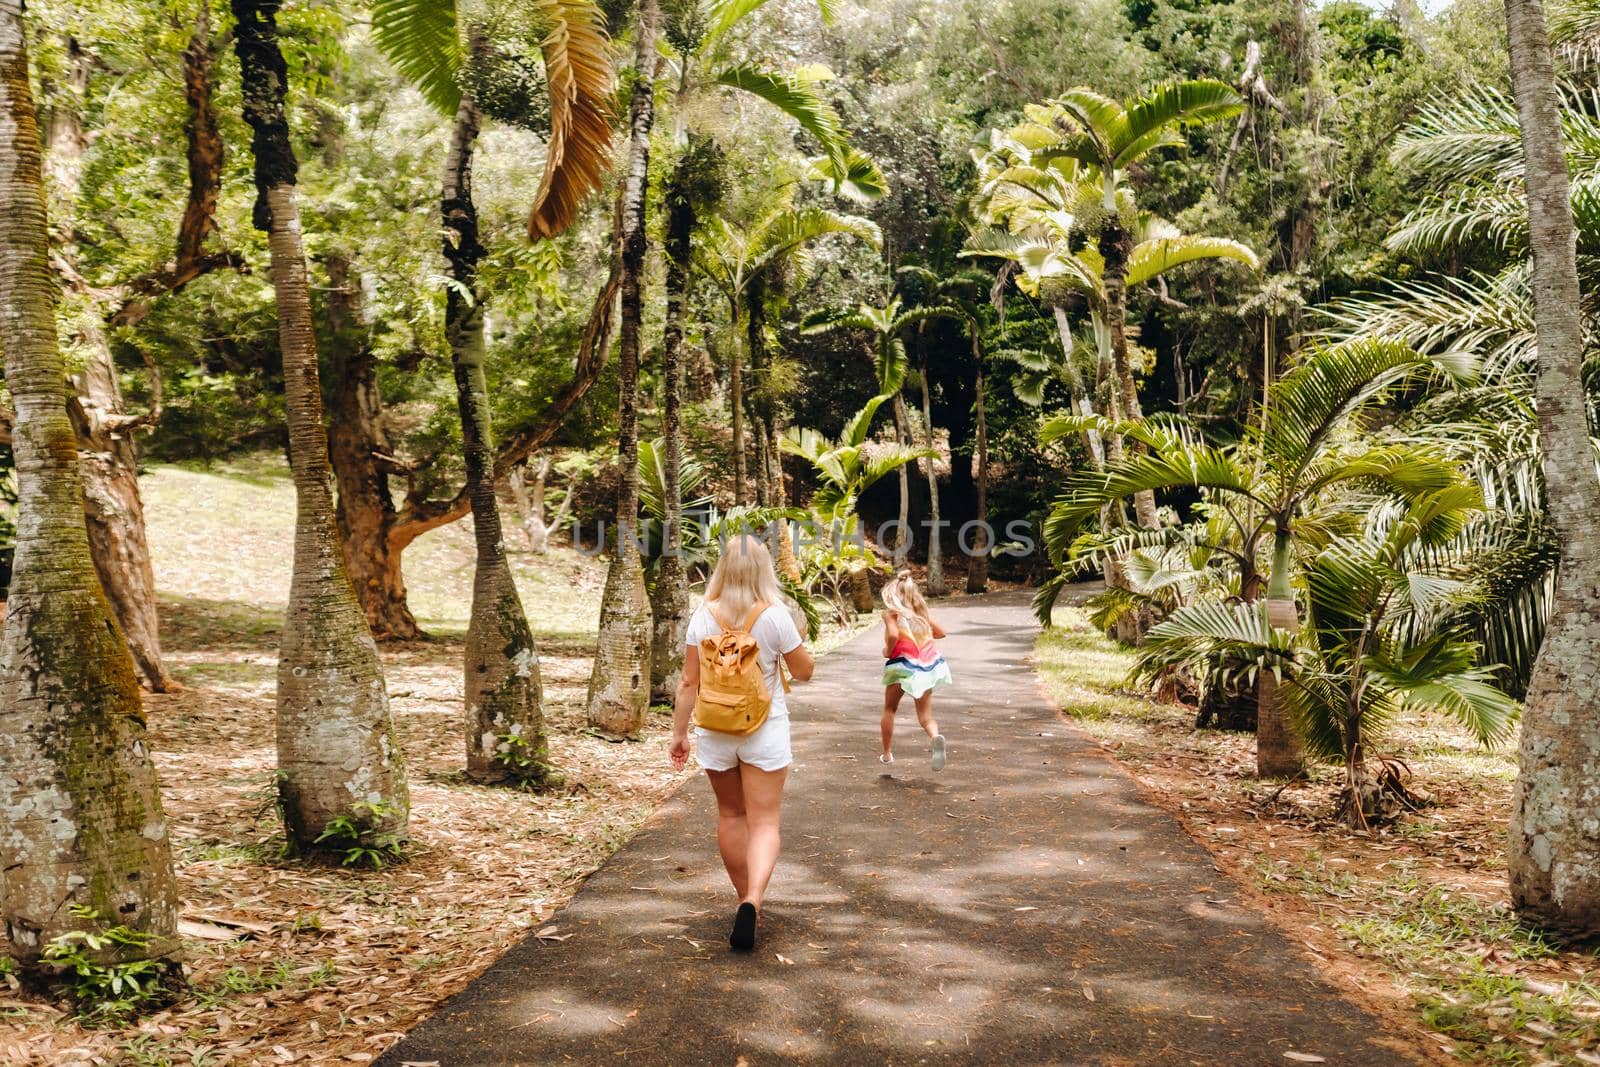 Tourists walk along the avenue with large palm trees in the Pamplemousse Botanical Garden on the island of Mauritius.